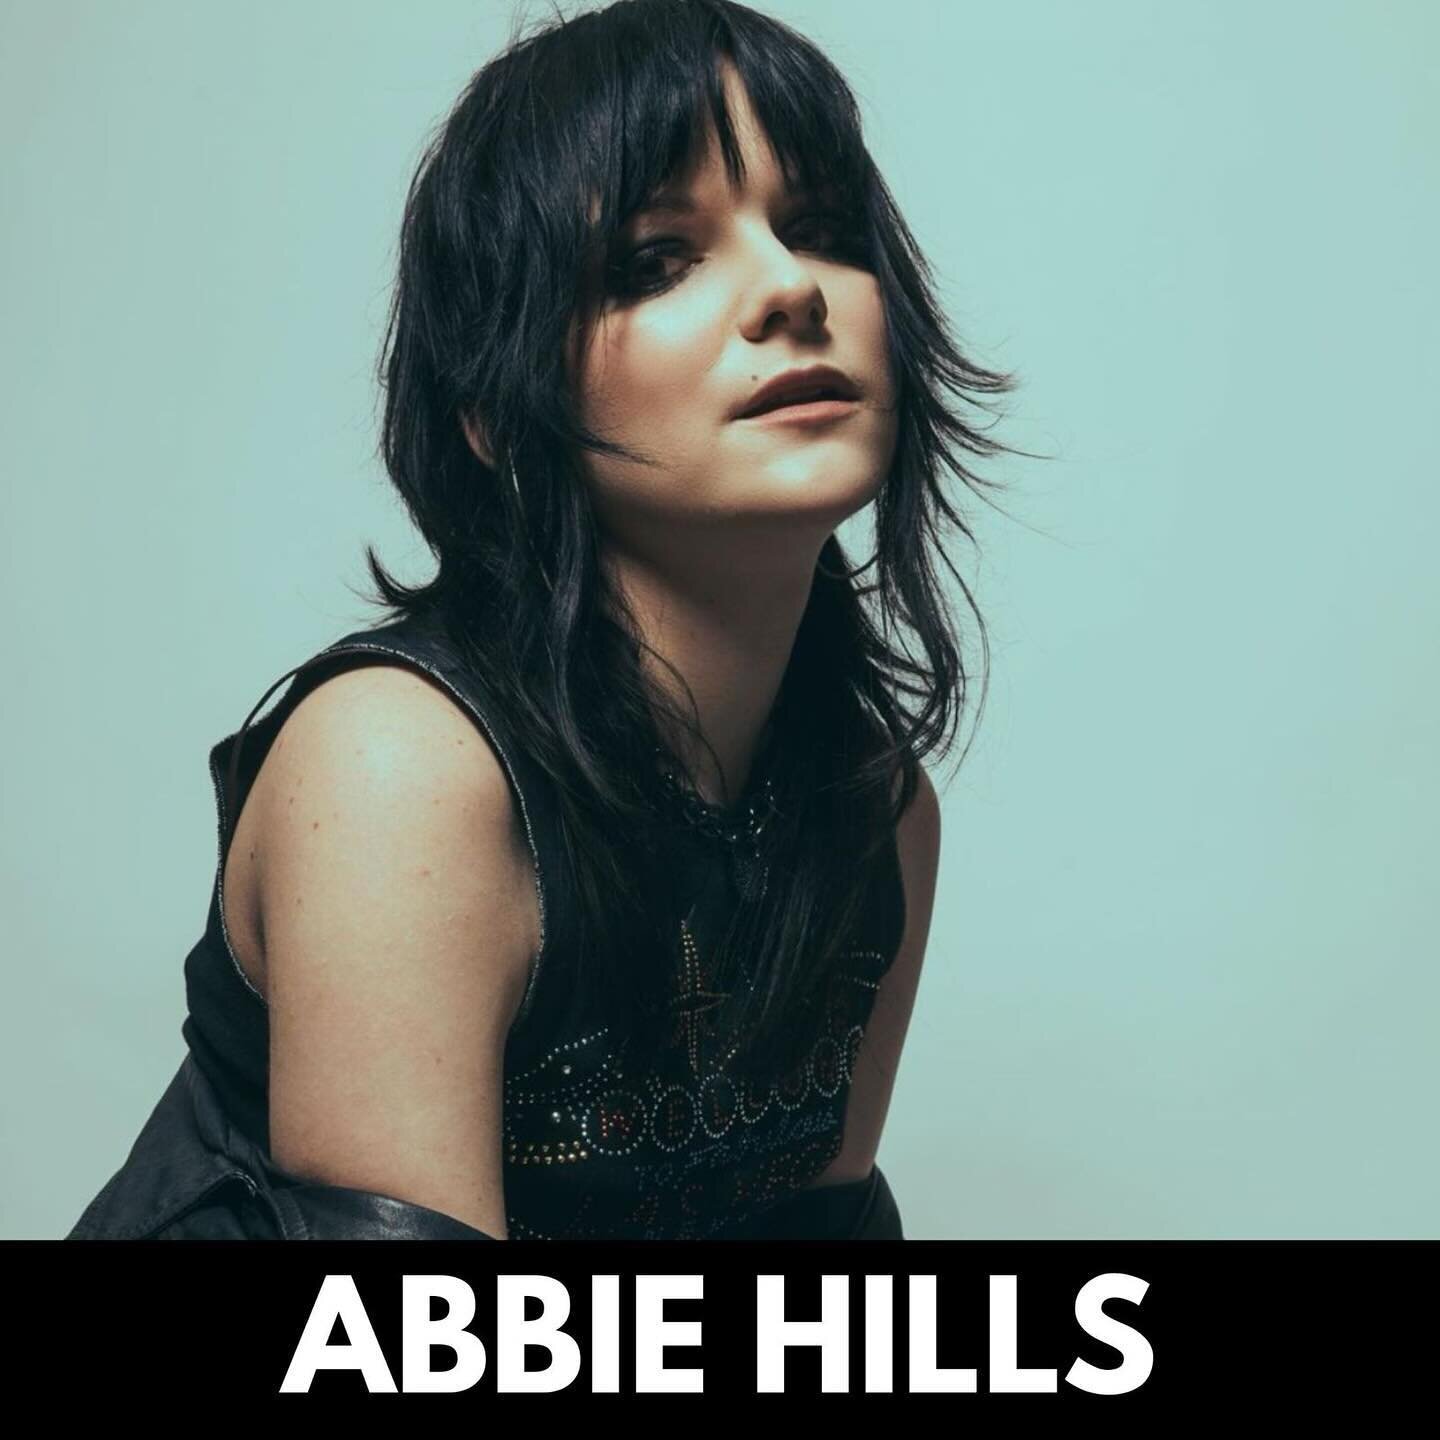 Name: Abbie Hills
Pronouns: She / Her&nbsp;
Job Title: Talent Agent / Filmmaker / Access Coordinator

Today we are celebrating&nbsp;@itsabbiehills as part of our &lsquo;Any Brief&rsquo; campaign designed to highlight some of the brilliant talent we g